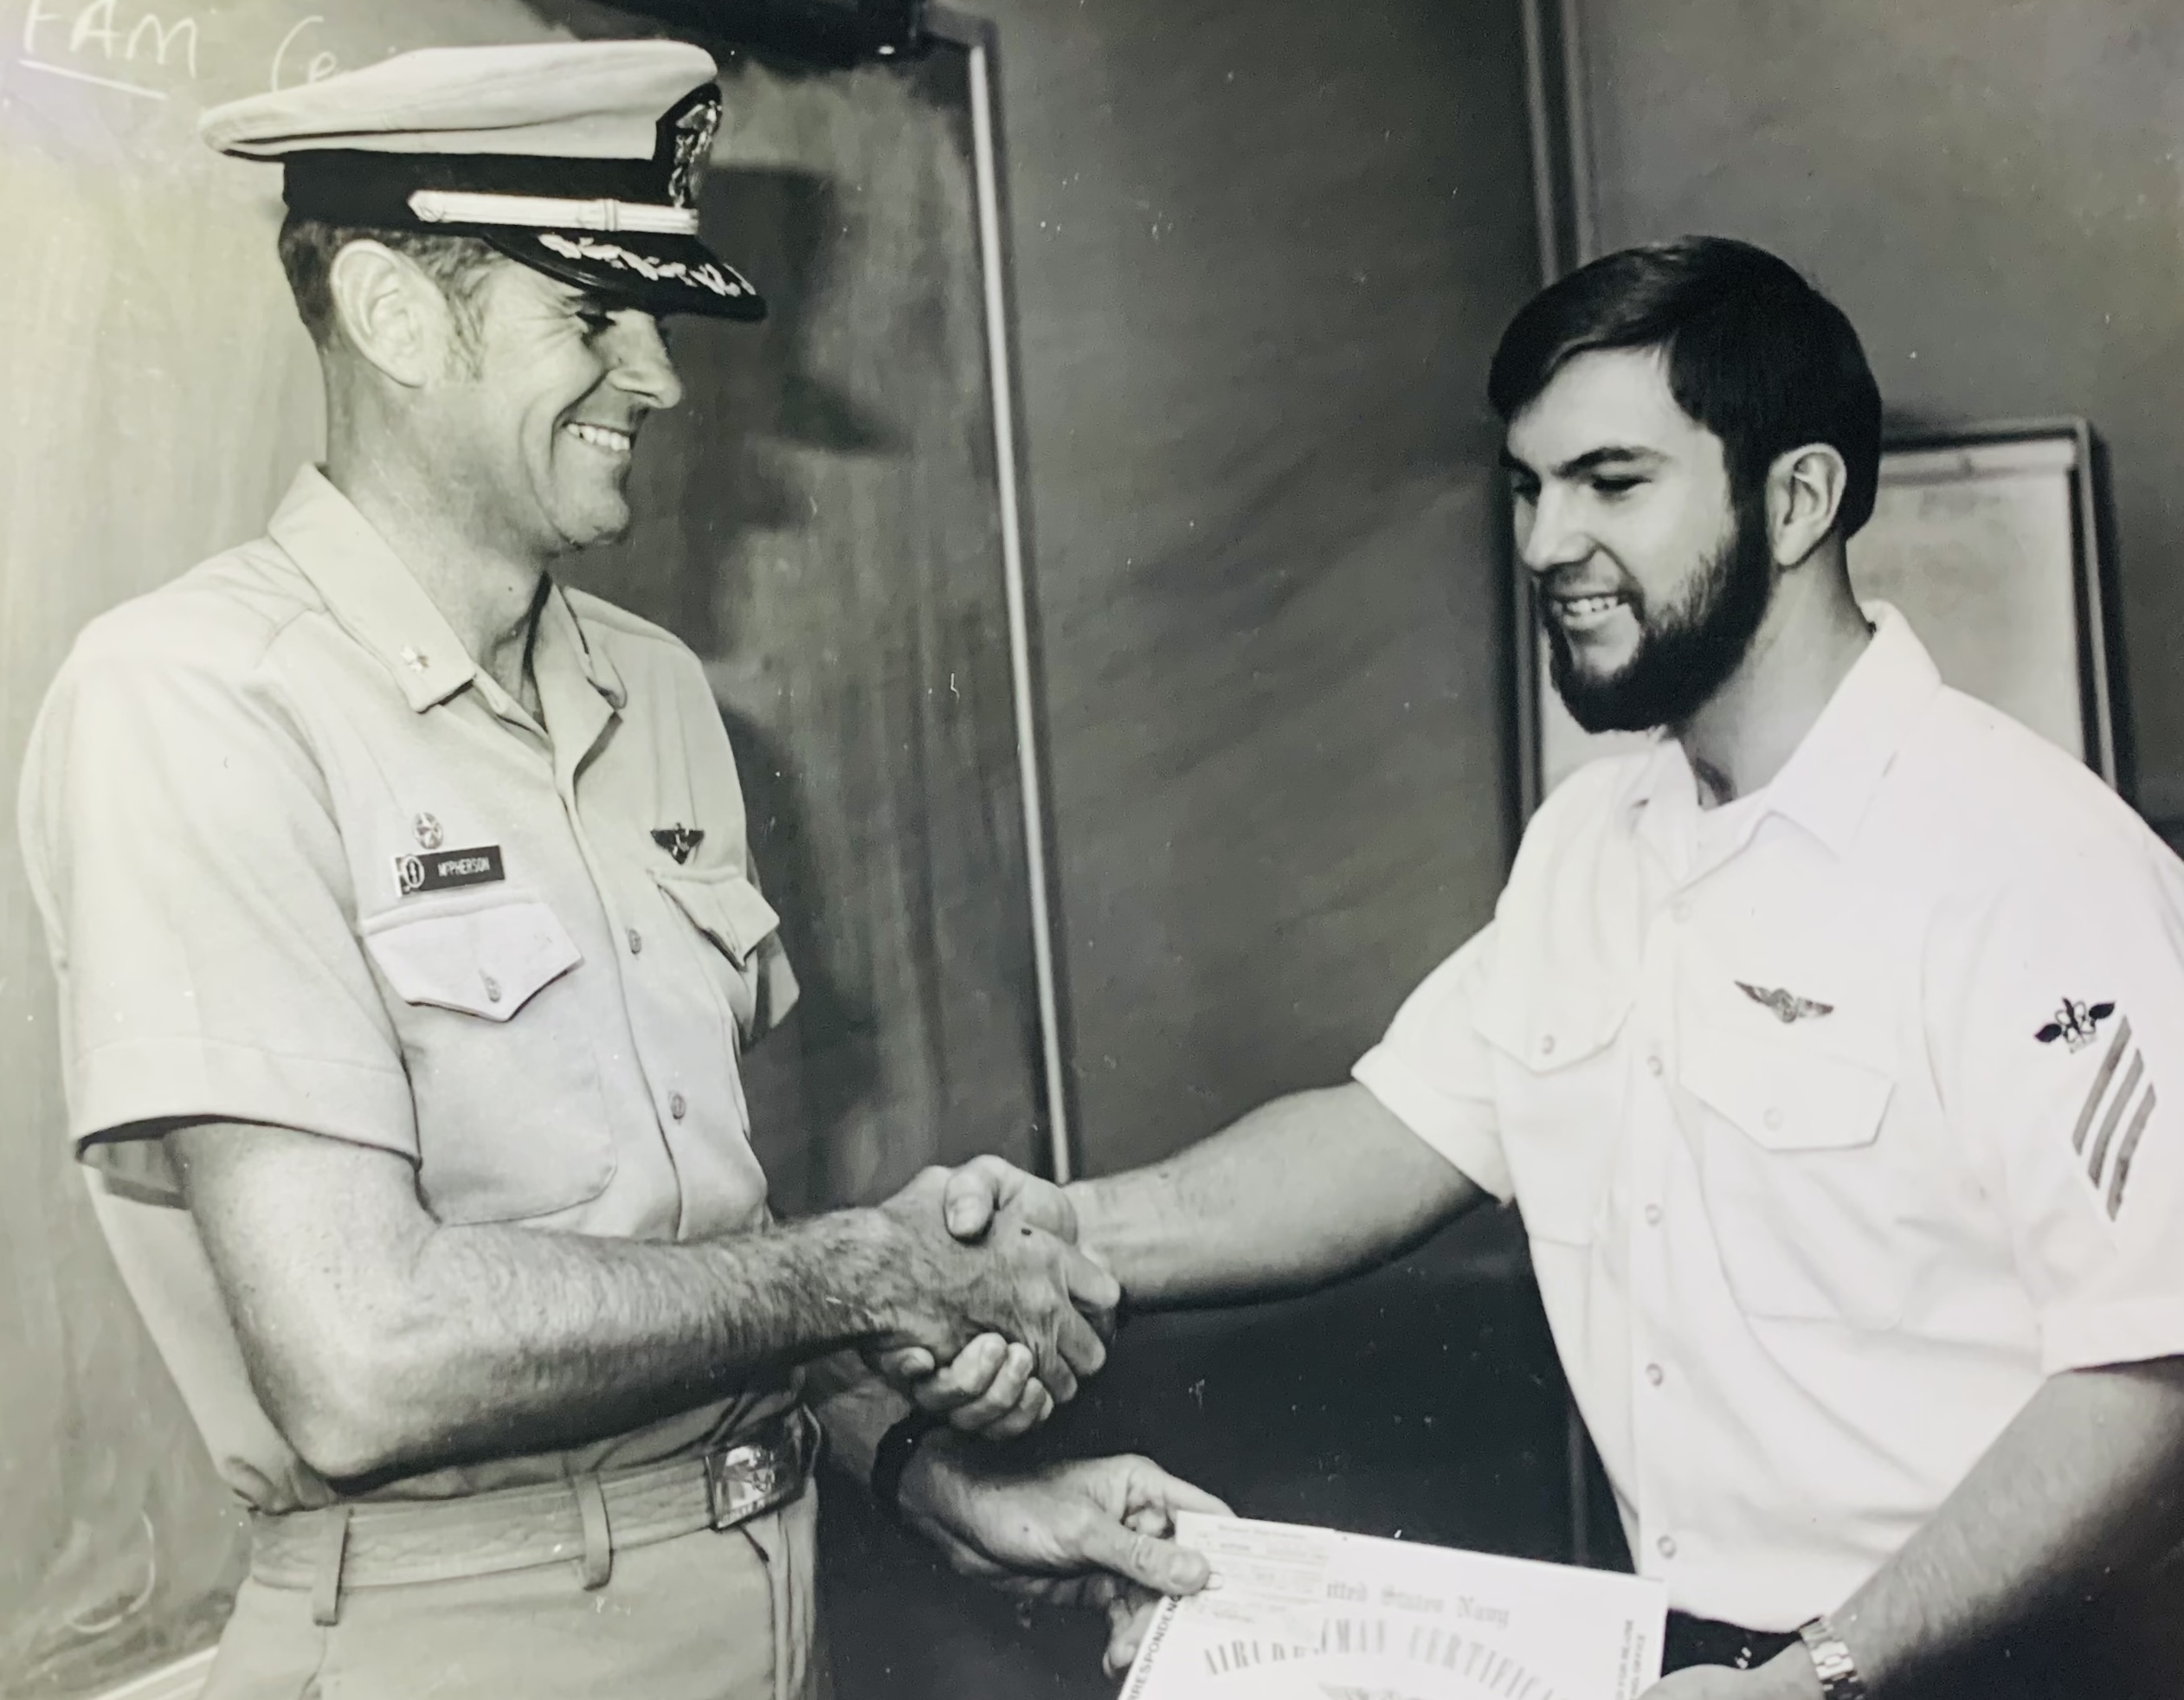 Navy officer shaking hands with an enlisted sailor